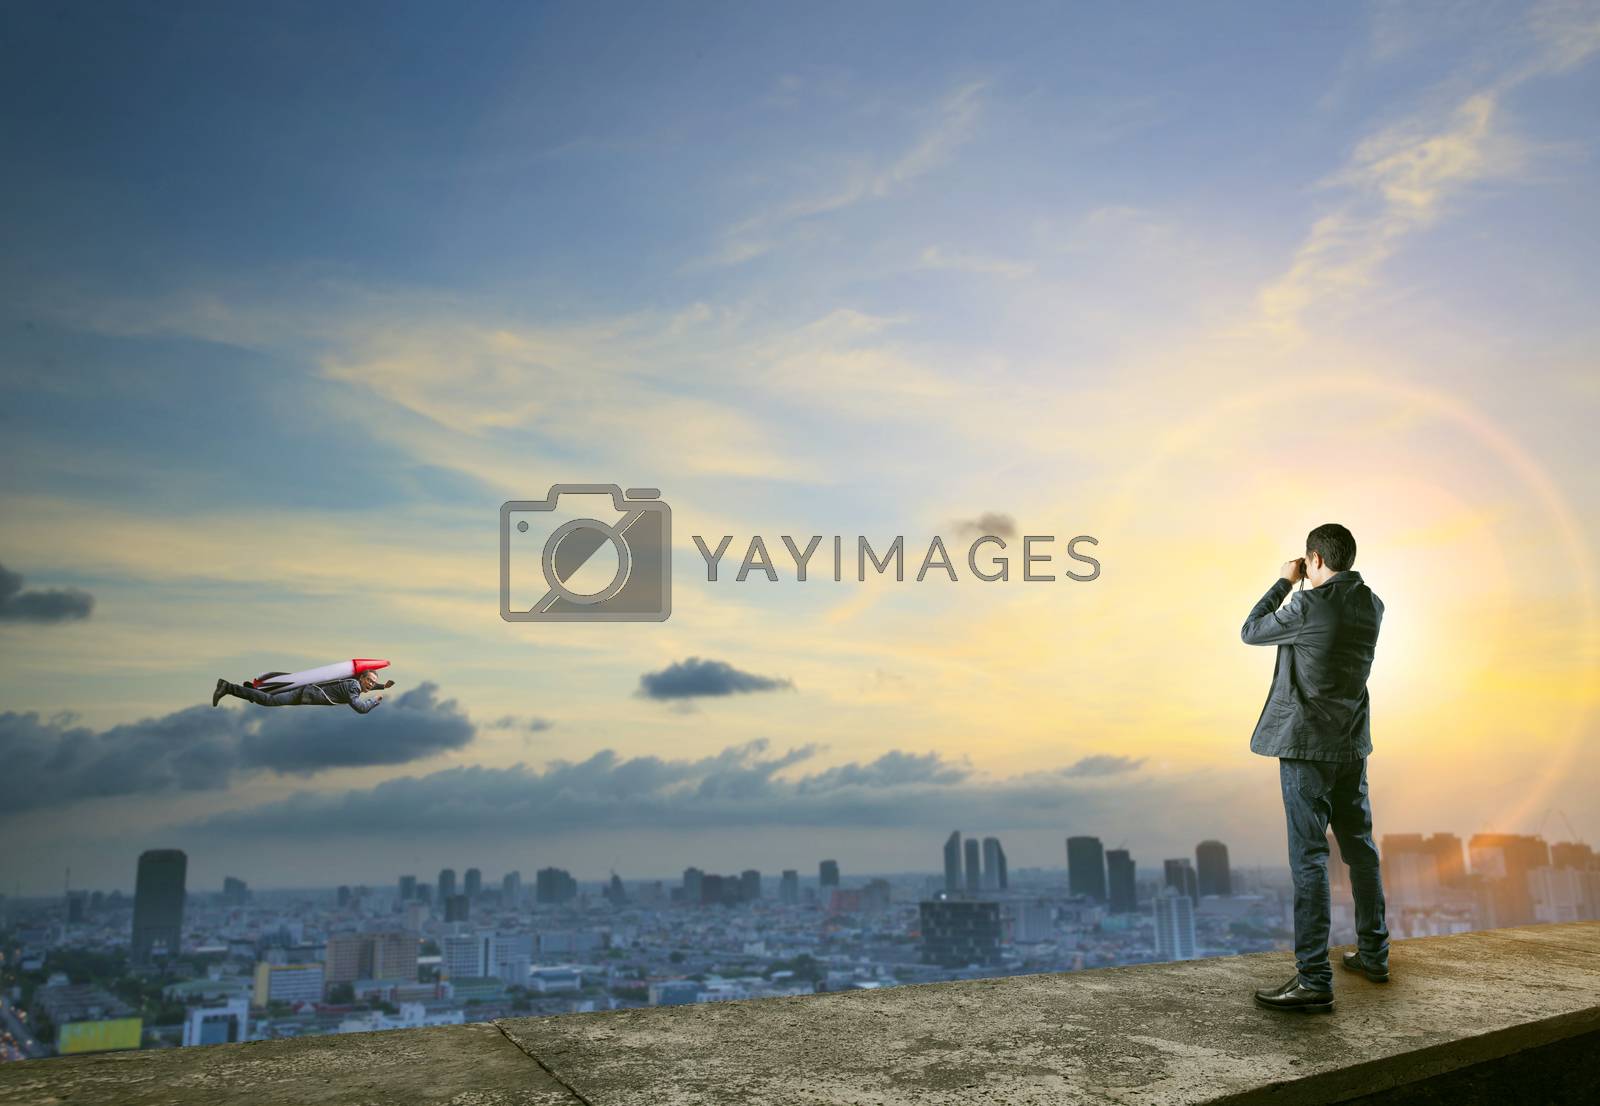 Royalty free image of business man binocular to man with rocket on back flying over ci by khunaspix